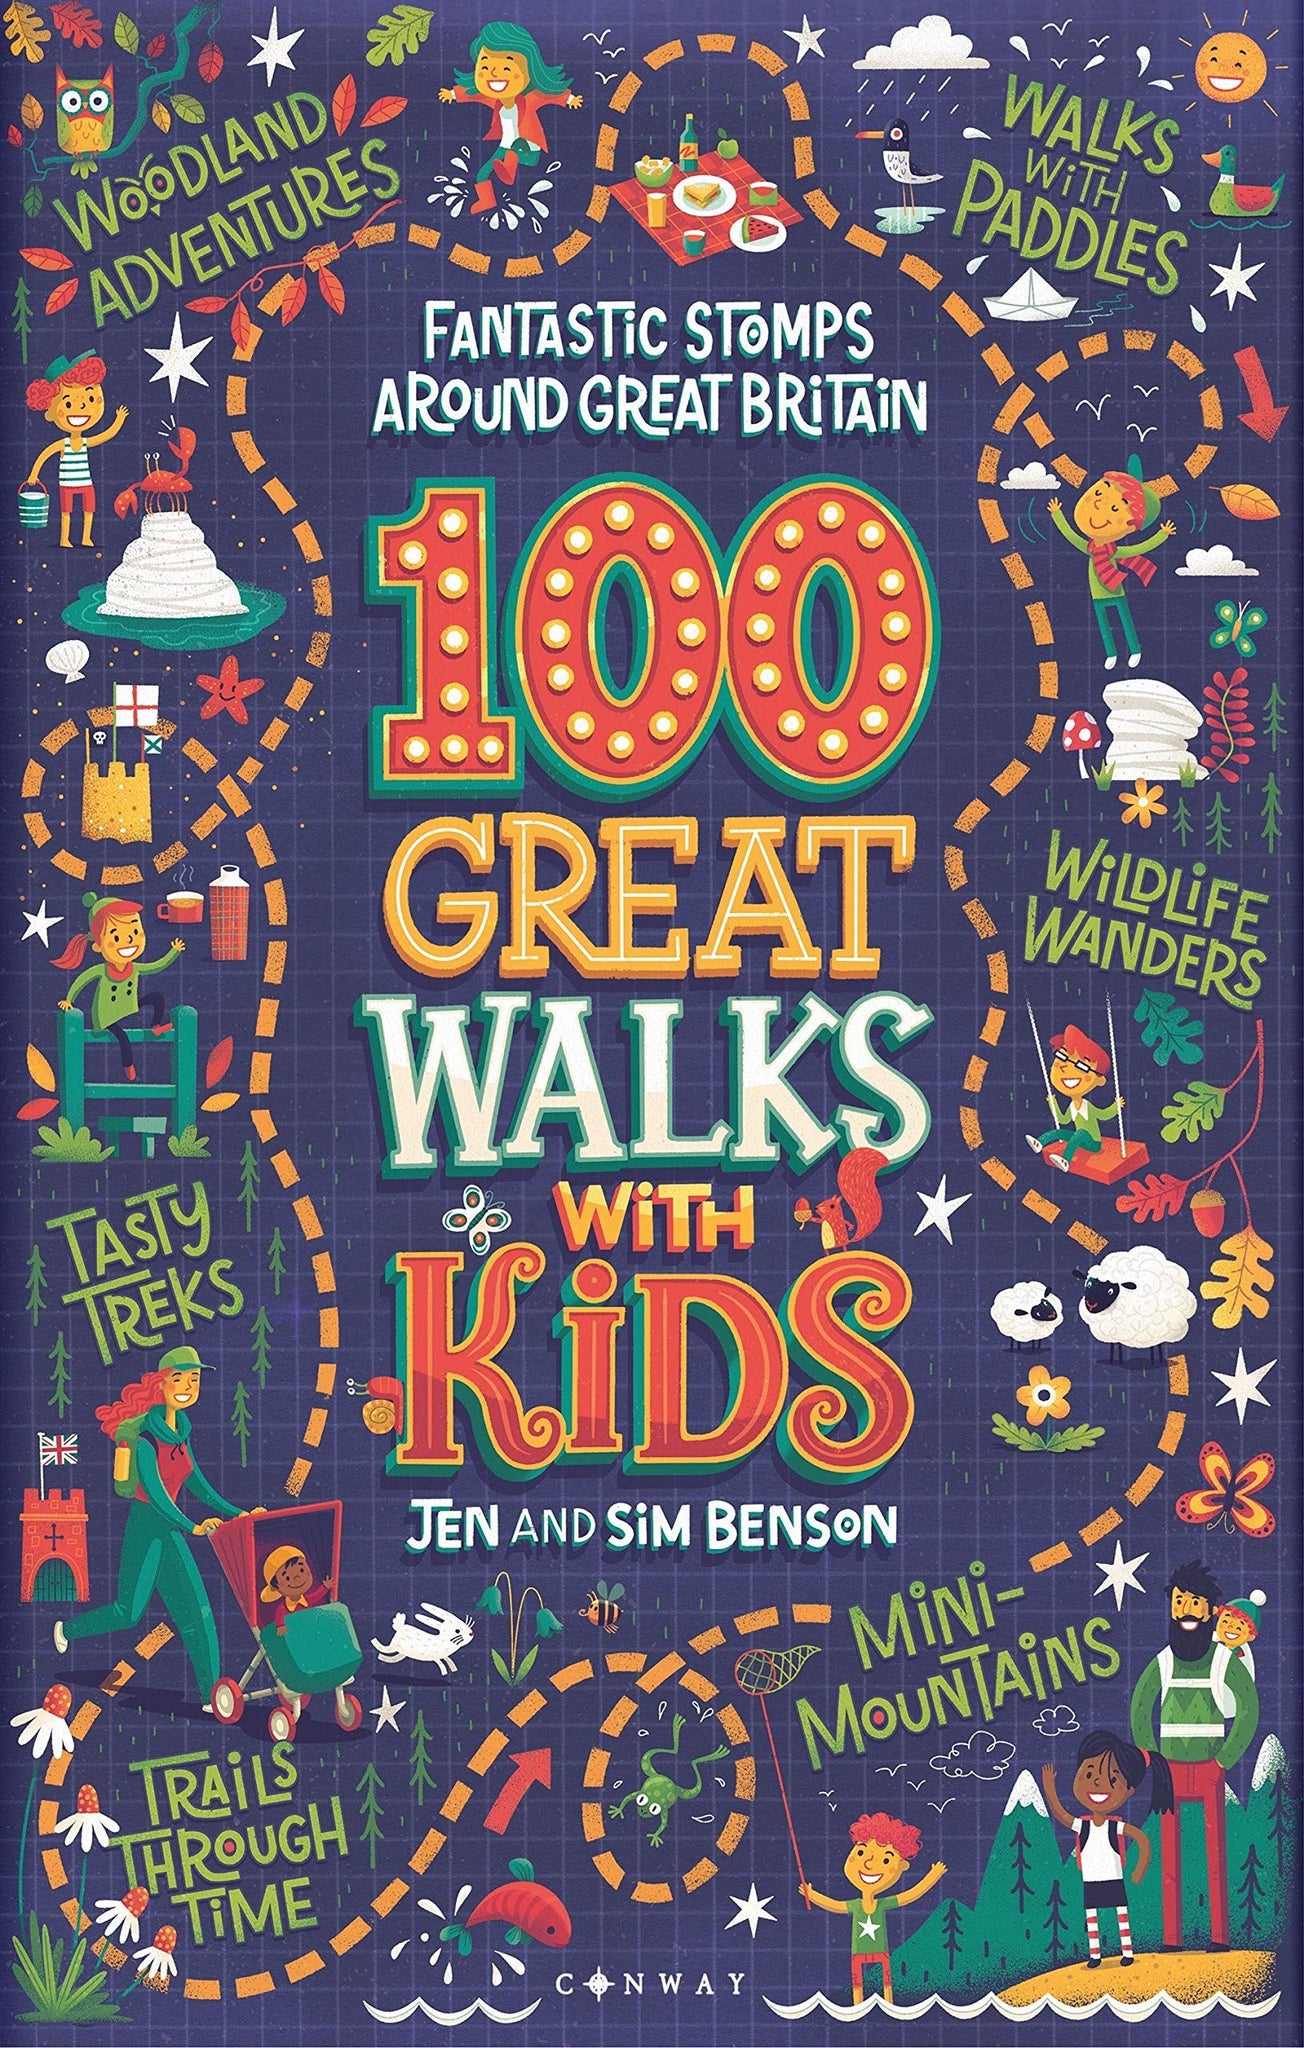 100 wonderful walks around Britain suitable for families with children from babyhood upwards.  Lovely book..